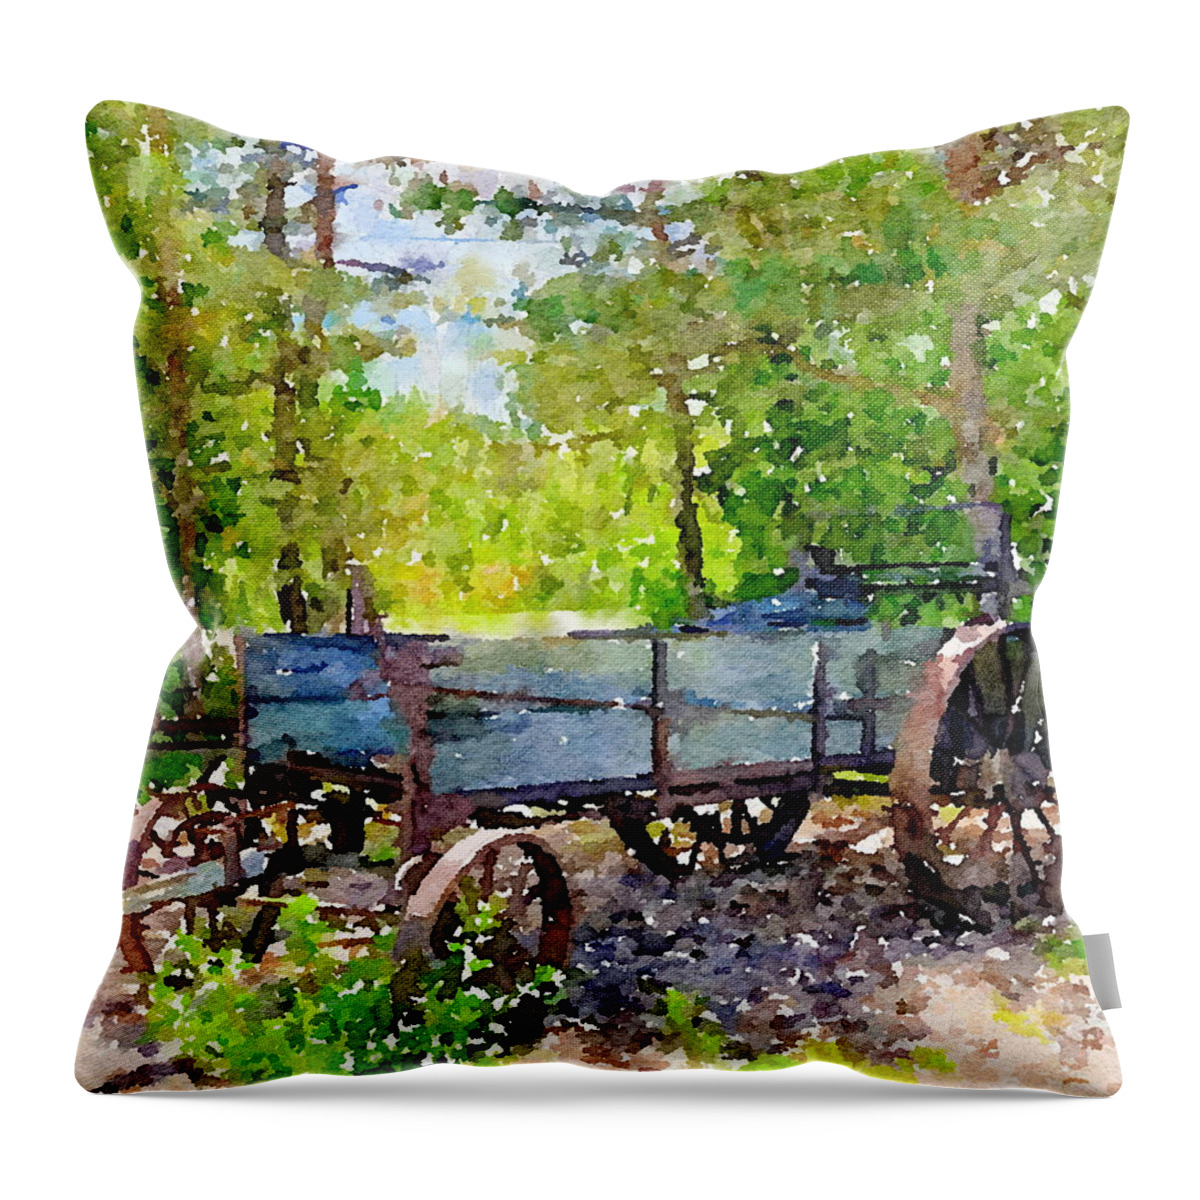 Country Throw Pillow featuring the digital art Simplicity by Kathy Bee